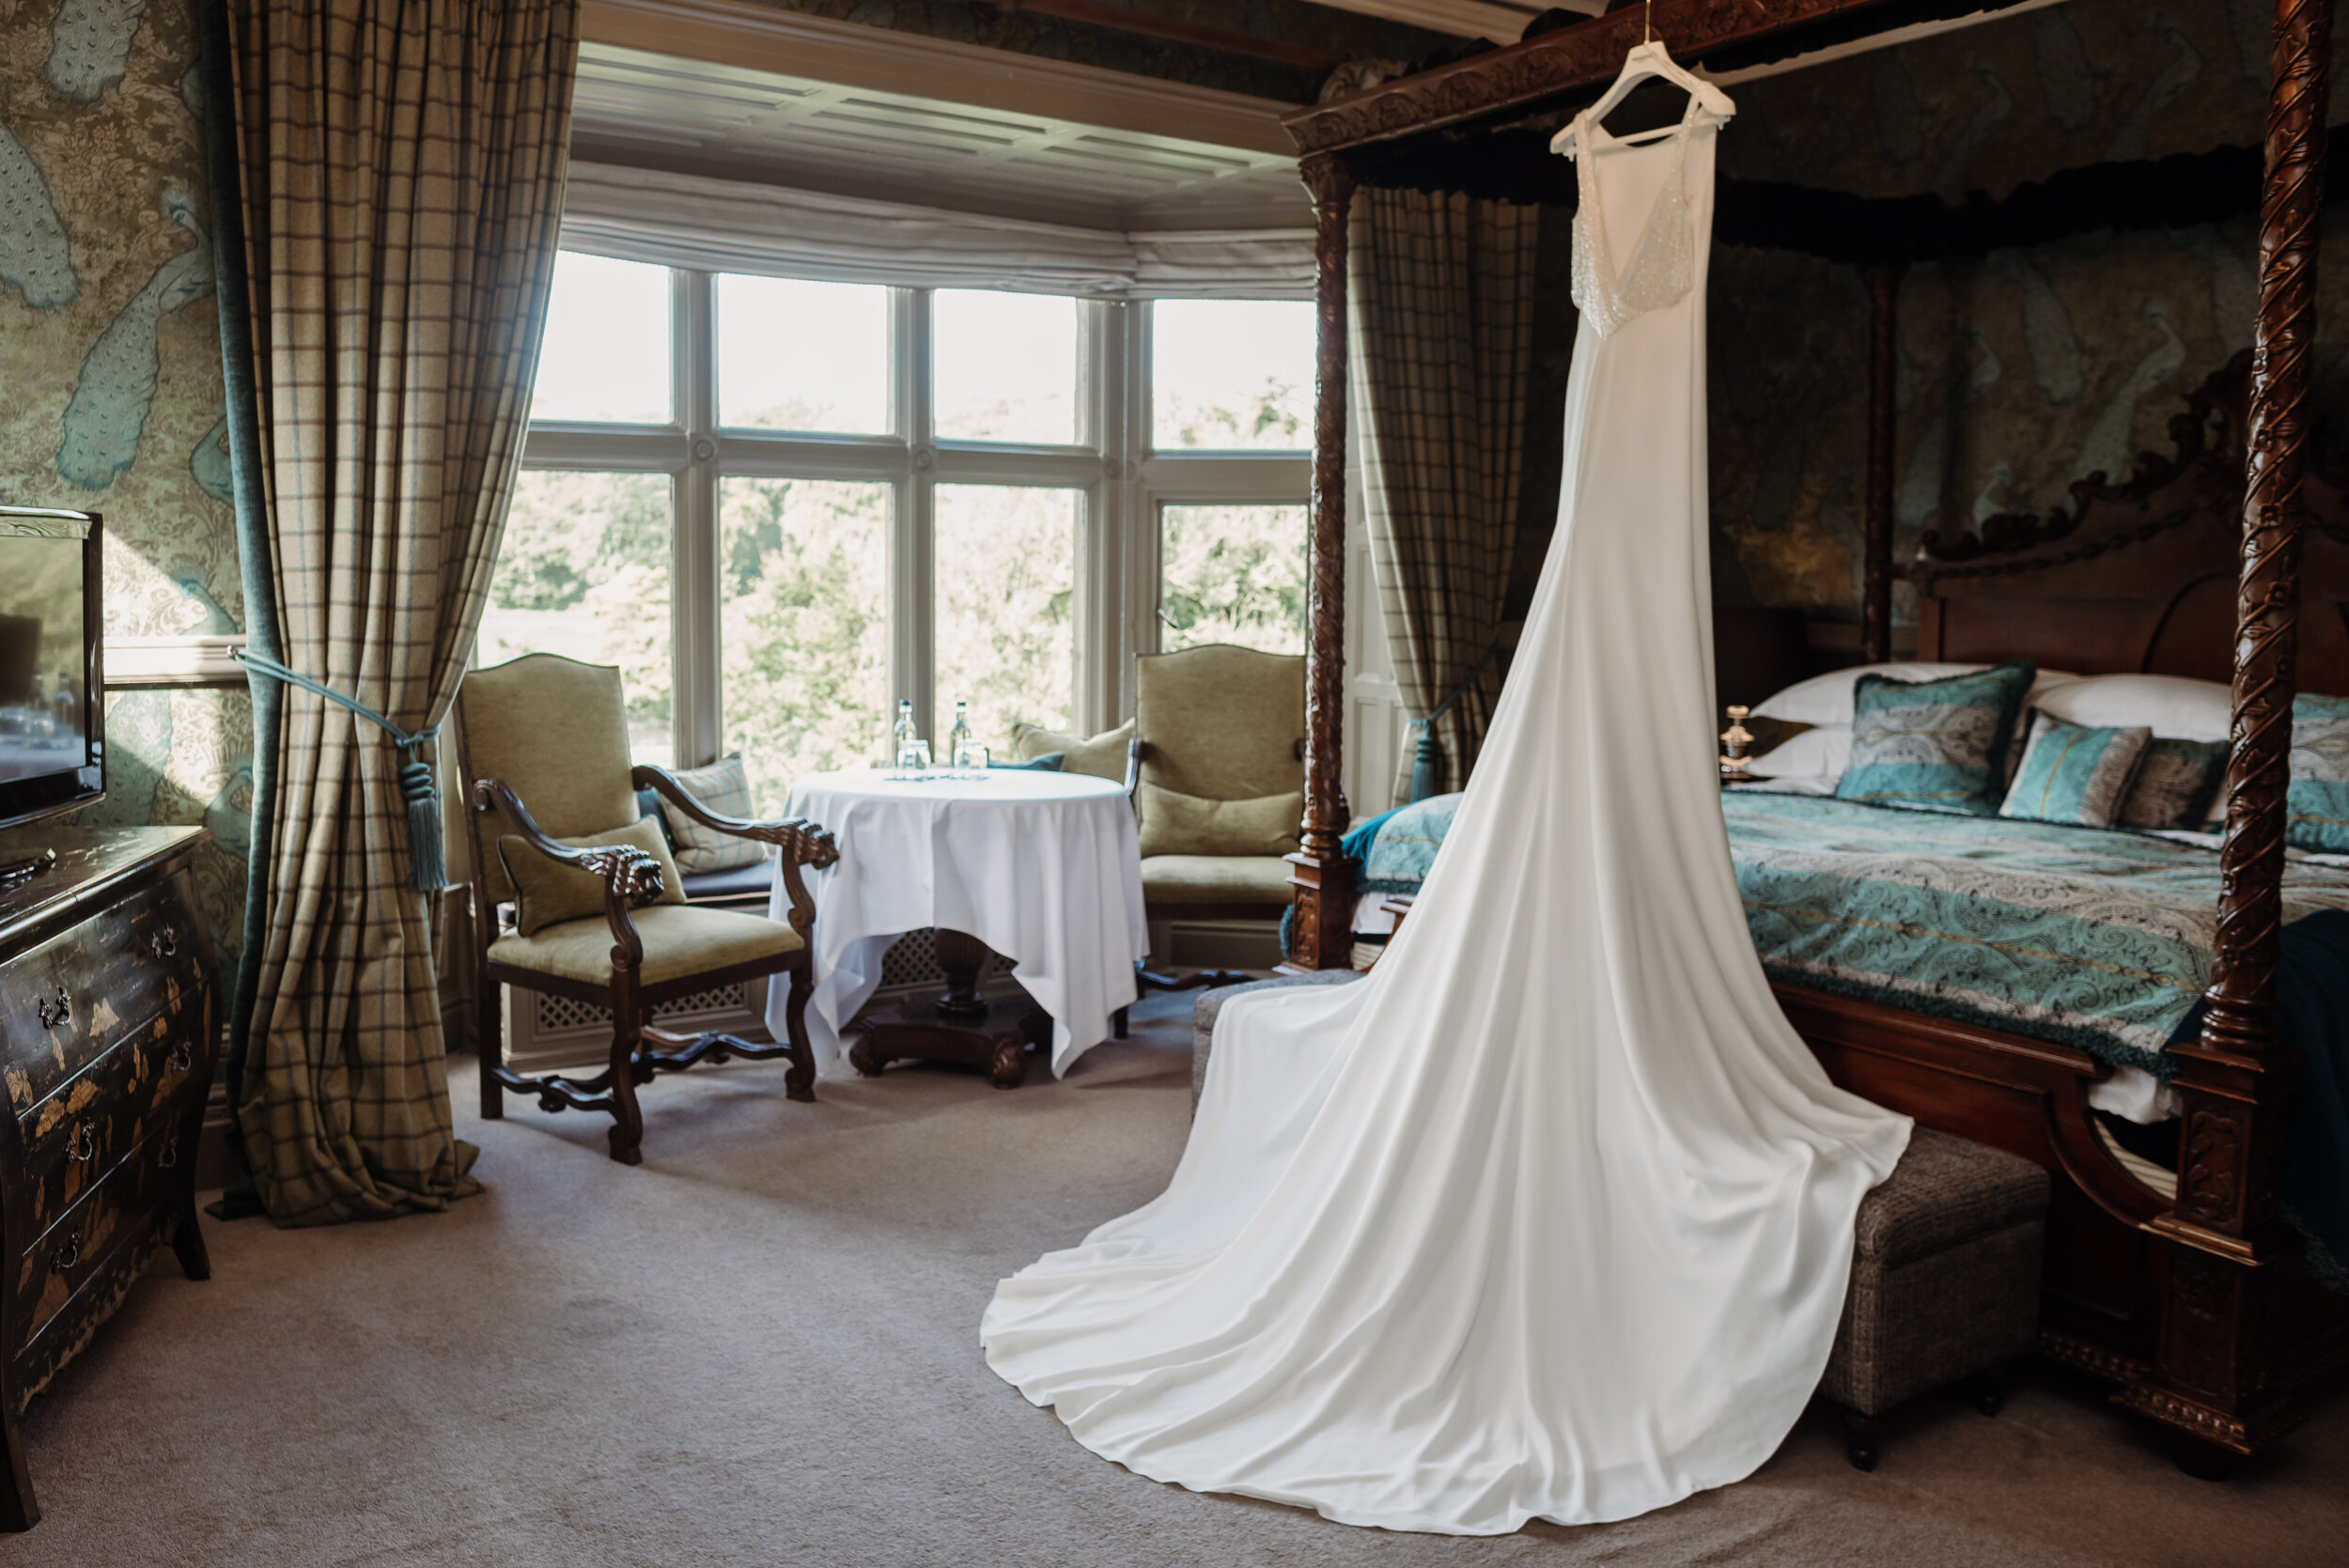 Wedding dress hanging on four poster bed